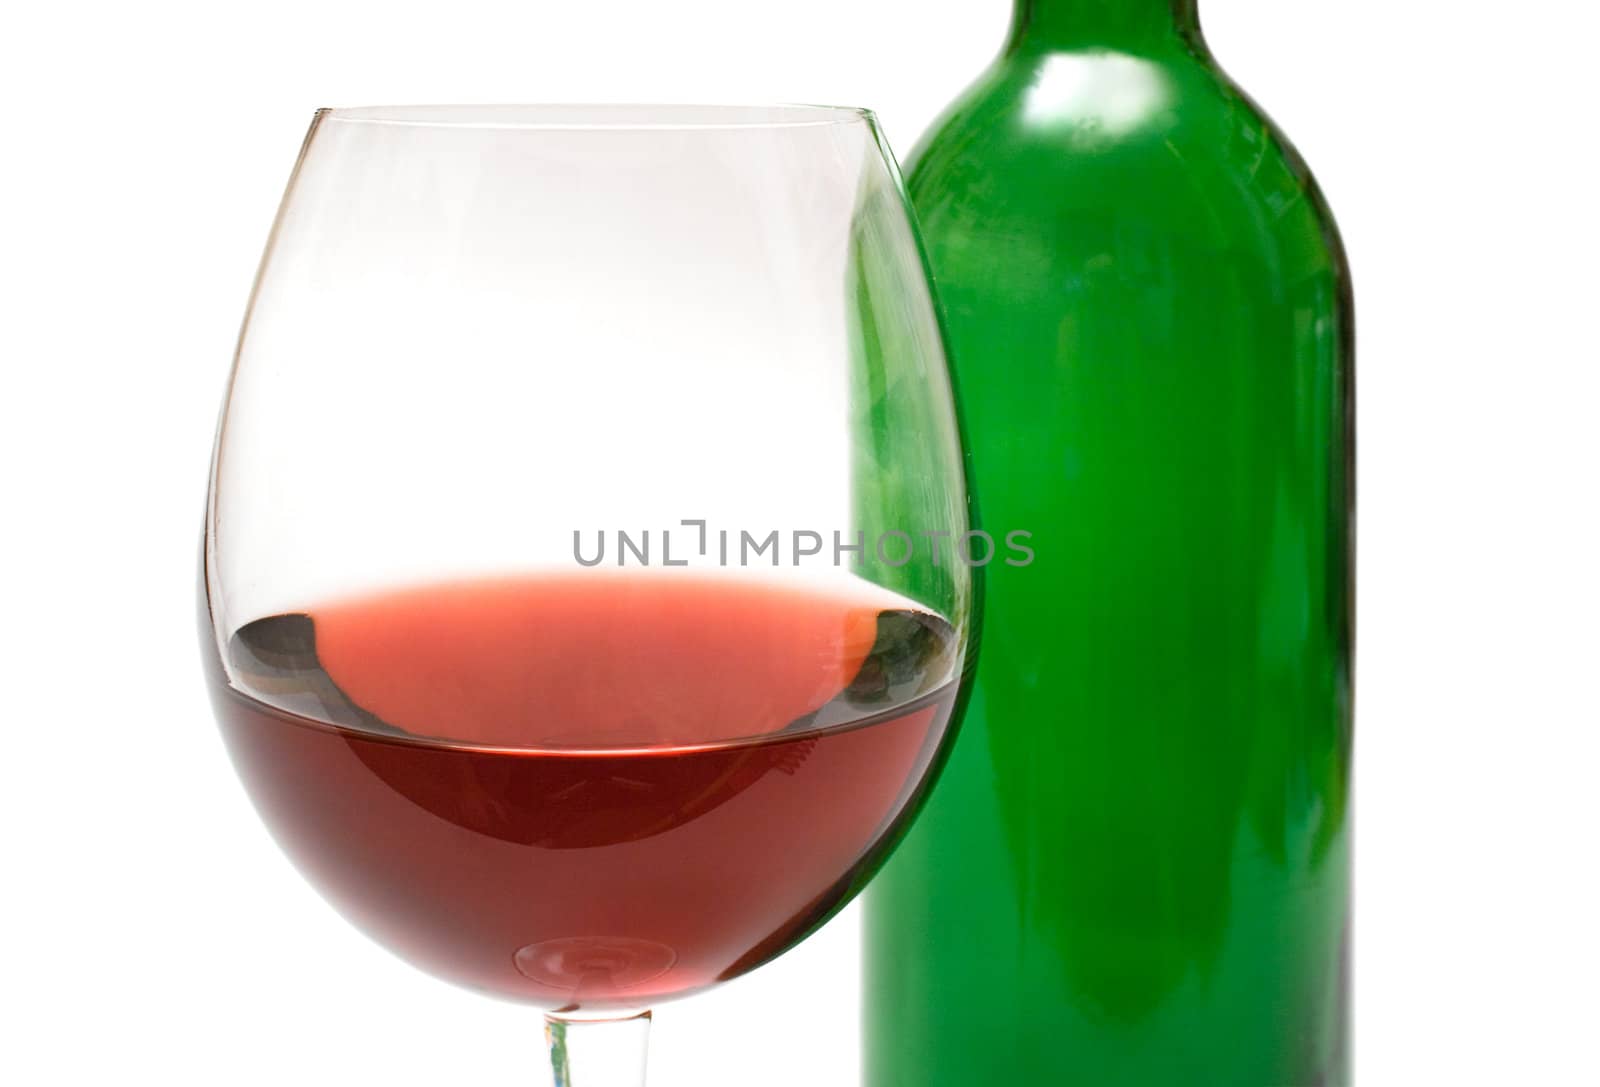 Drinking a glass of wine. Isolated on a white background.